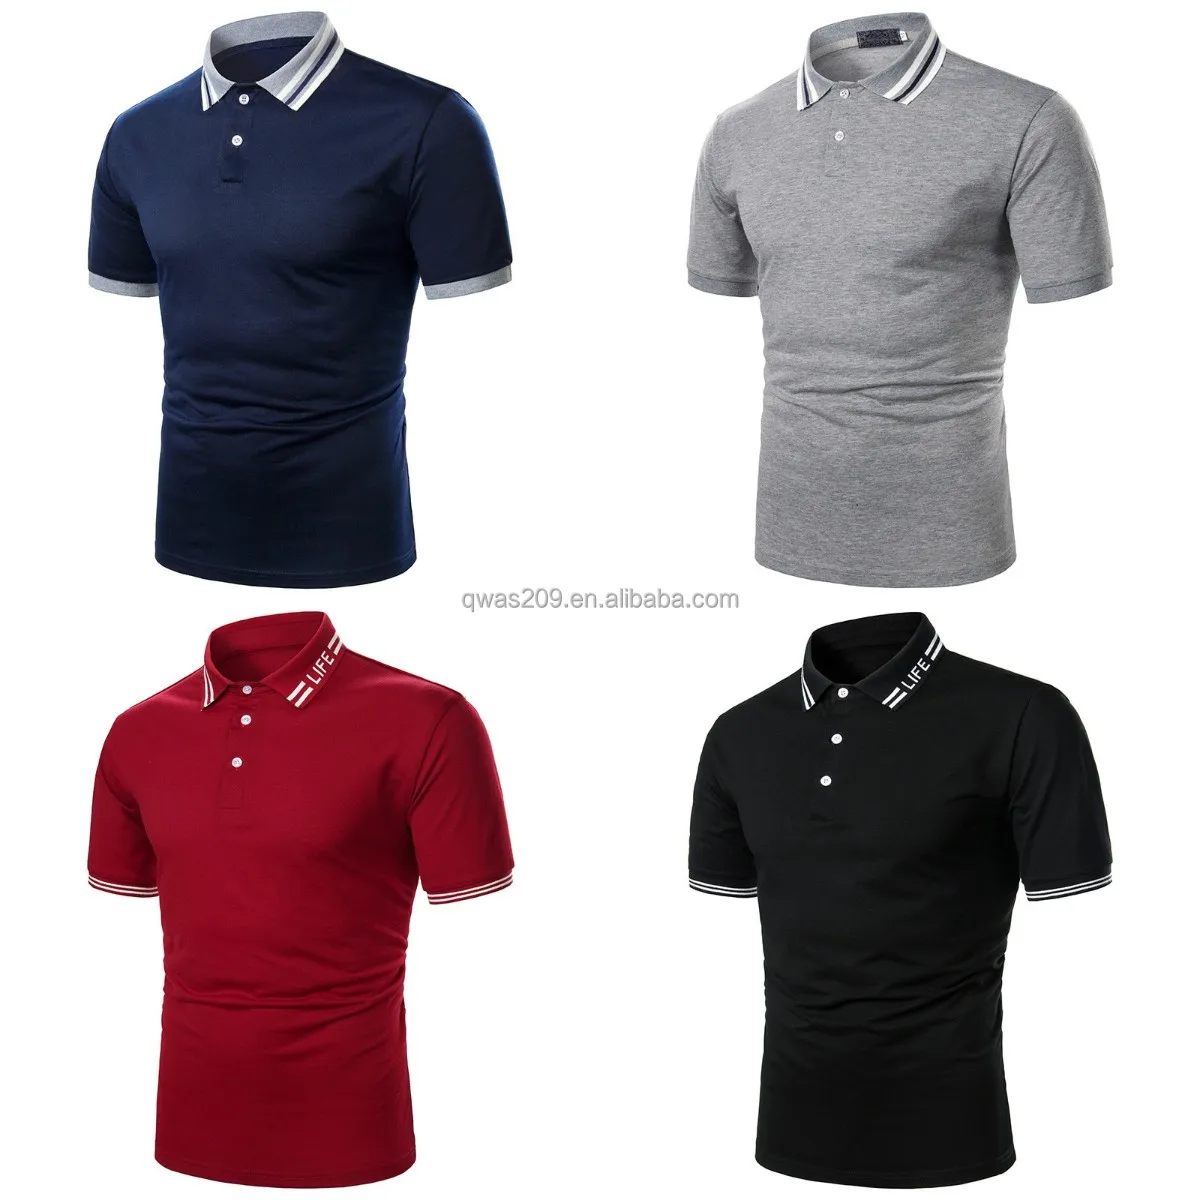 

Trendy Men's short-sleeved Polo Shirt oversized Men's Cotton Polo causal boys tops shirts China manufacturers